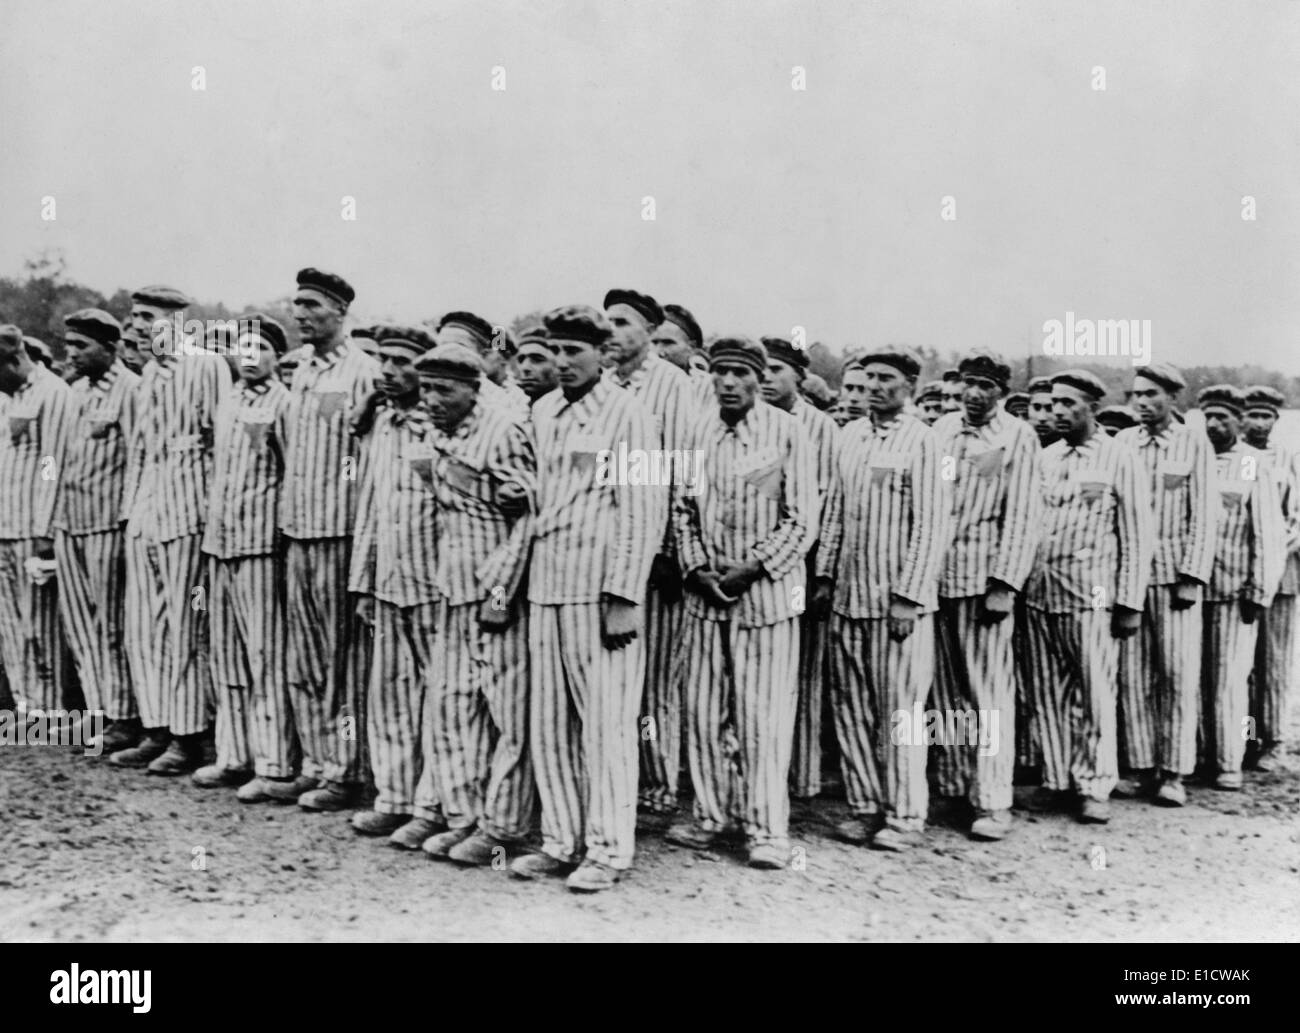 Roll call at Buchenwald concentration camp, ca. 1938-1941. Two prisoners in the foreground are supporting a comrade, as Stock Photo